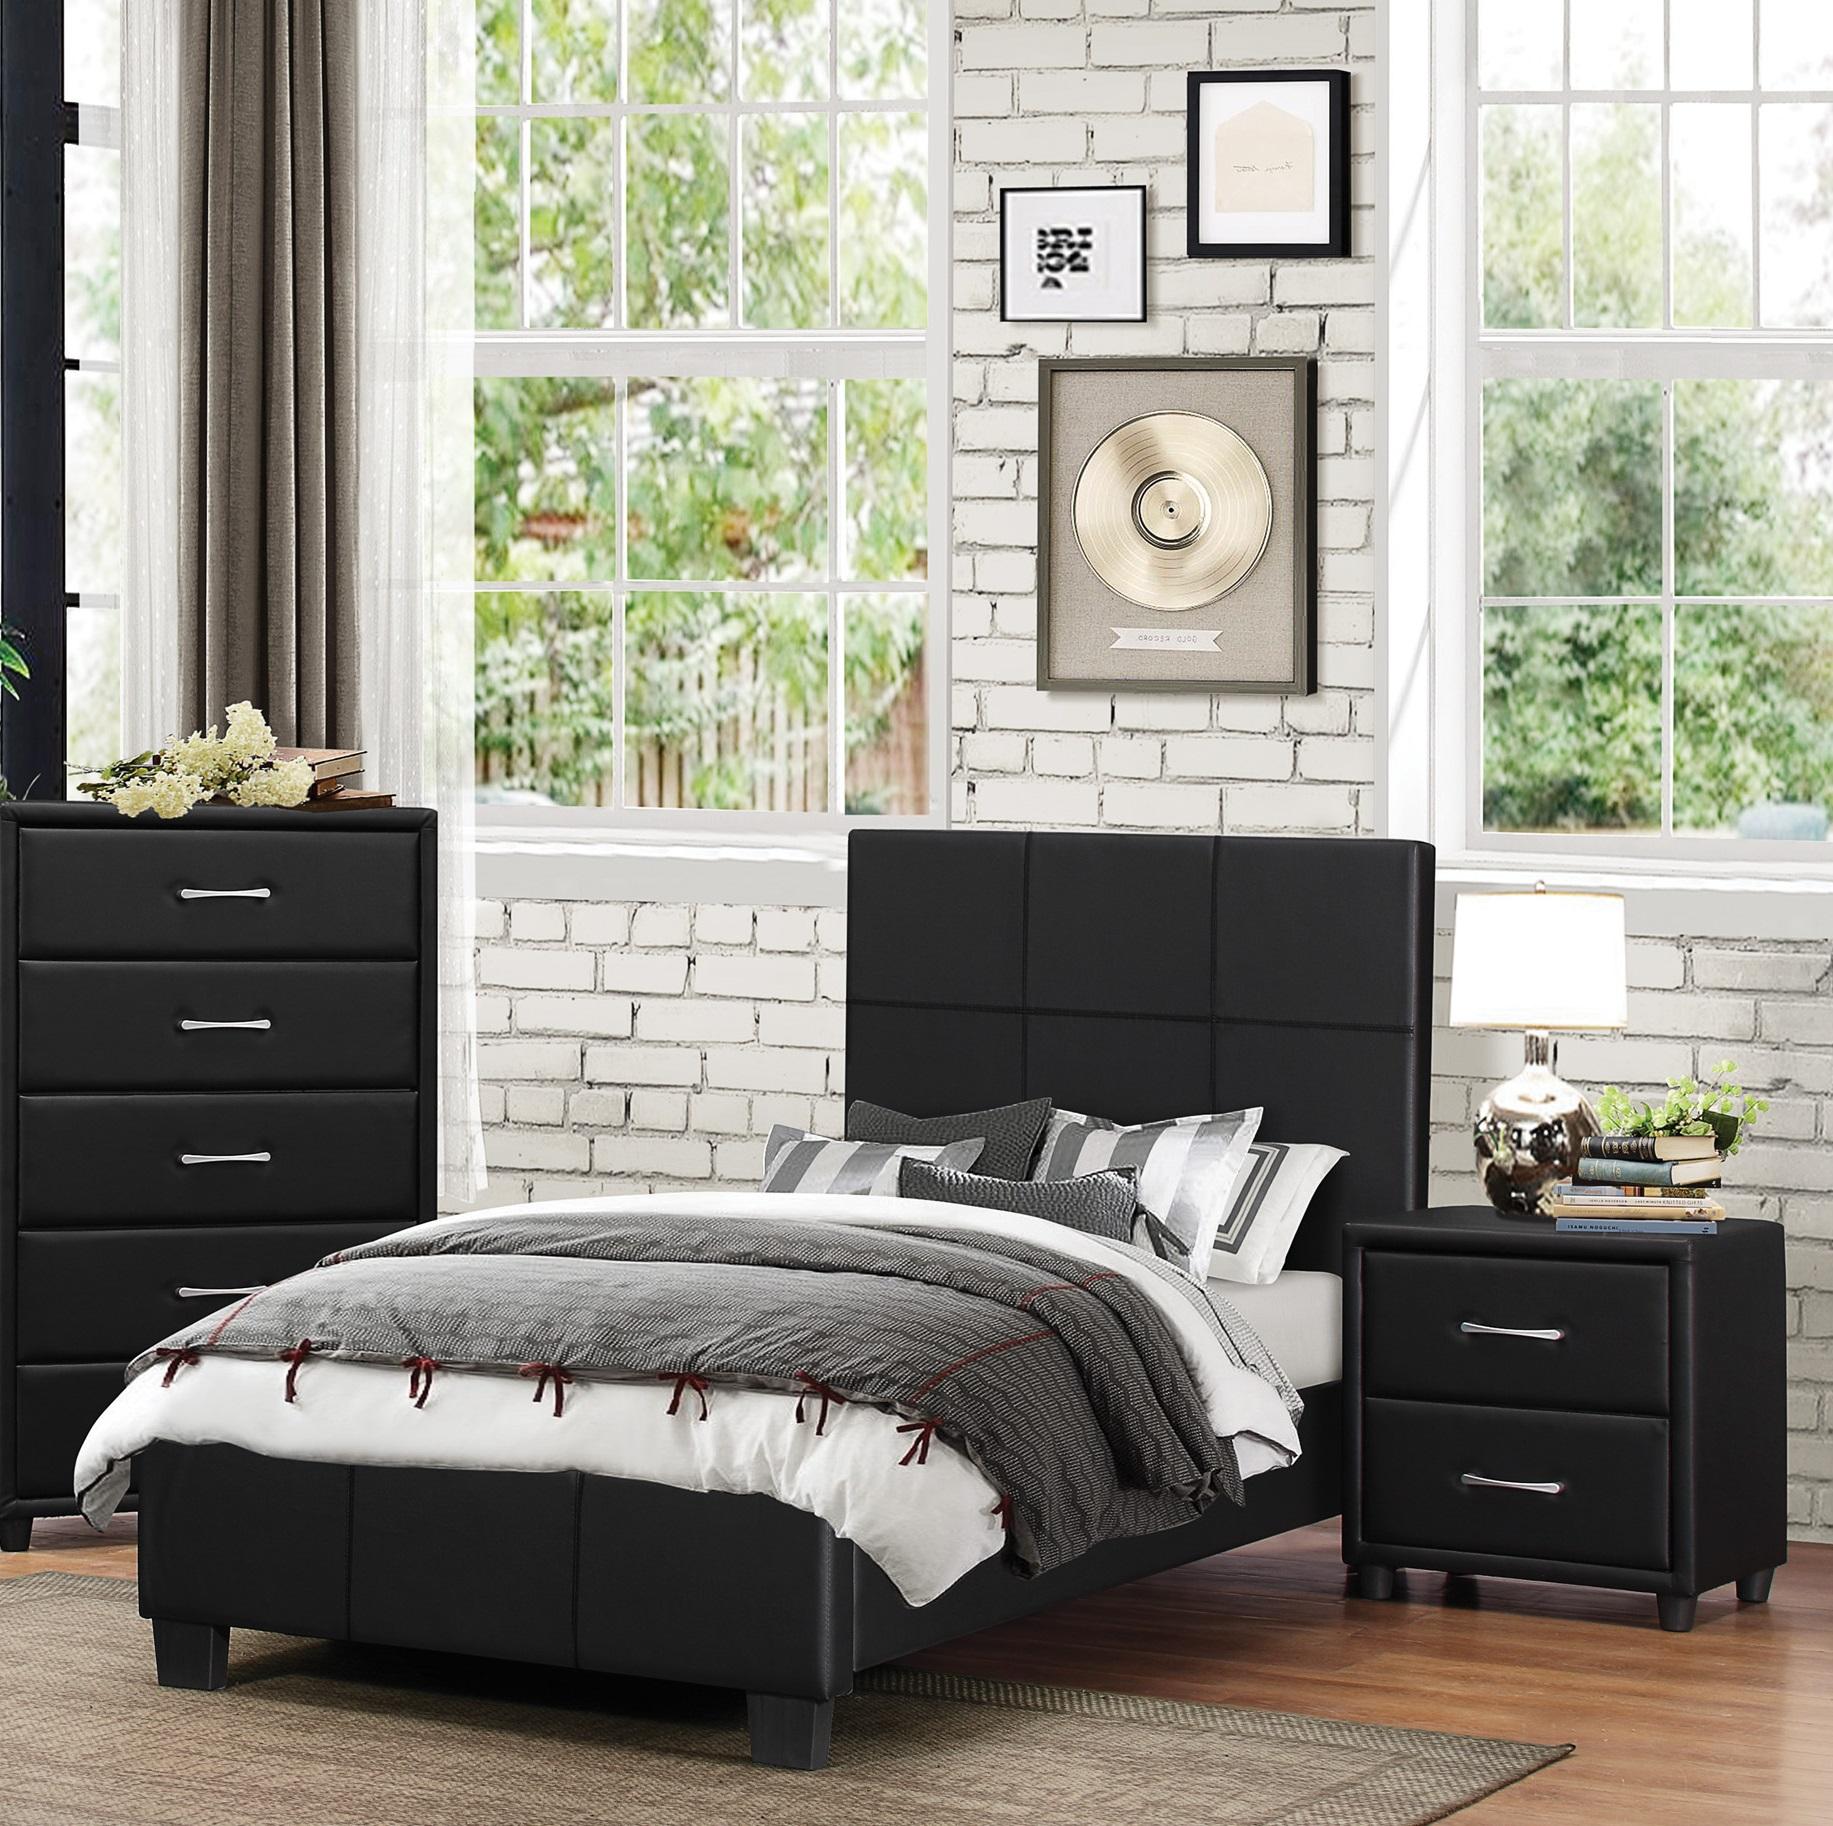 Contemporary Bedroom Set 2220T-1-3PC Lorenzi 2220T-1-3PC in Black Faux Leather